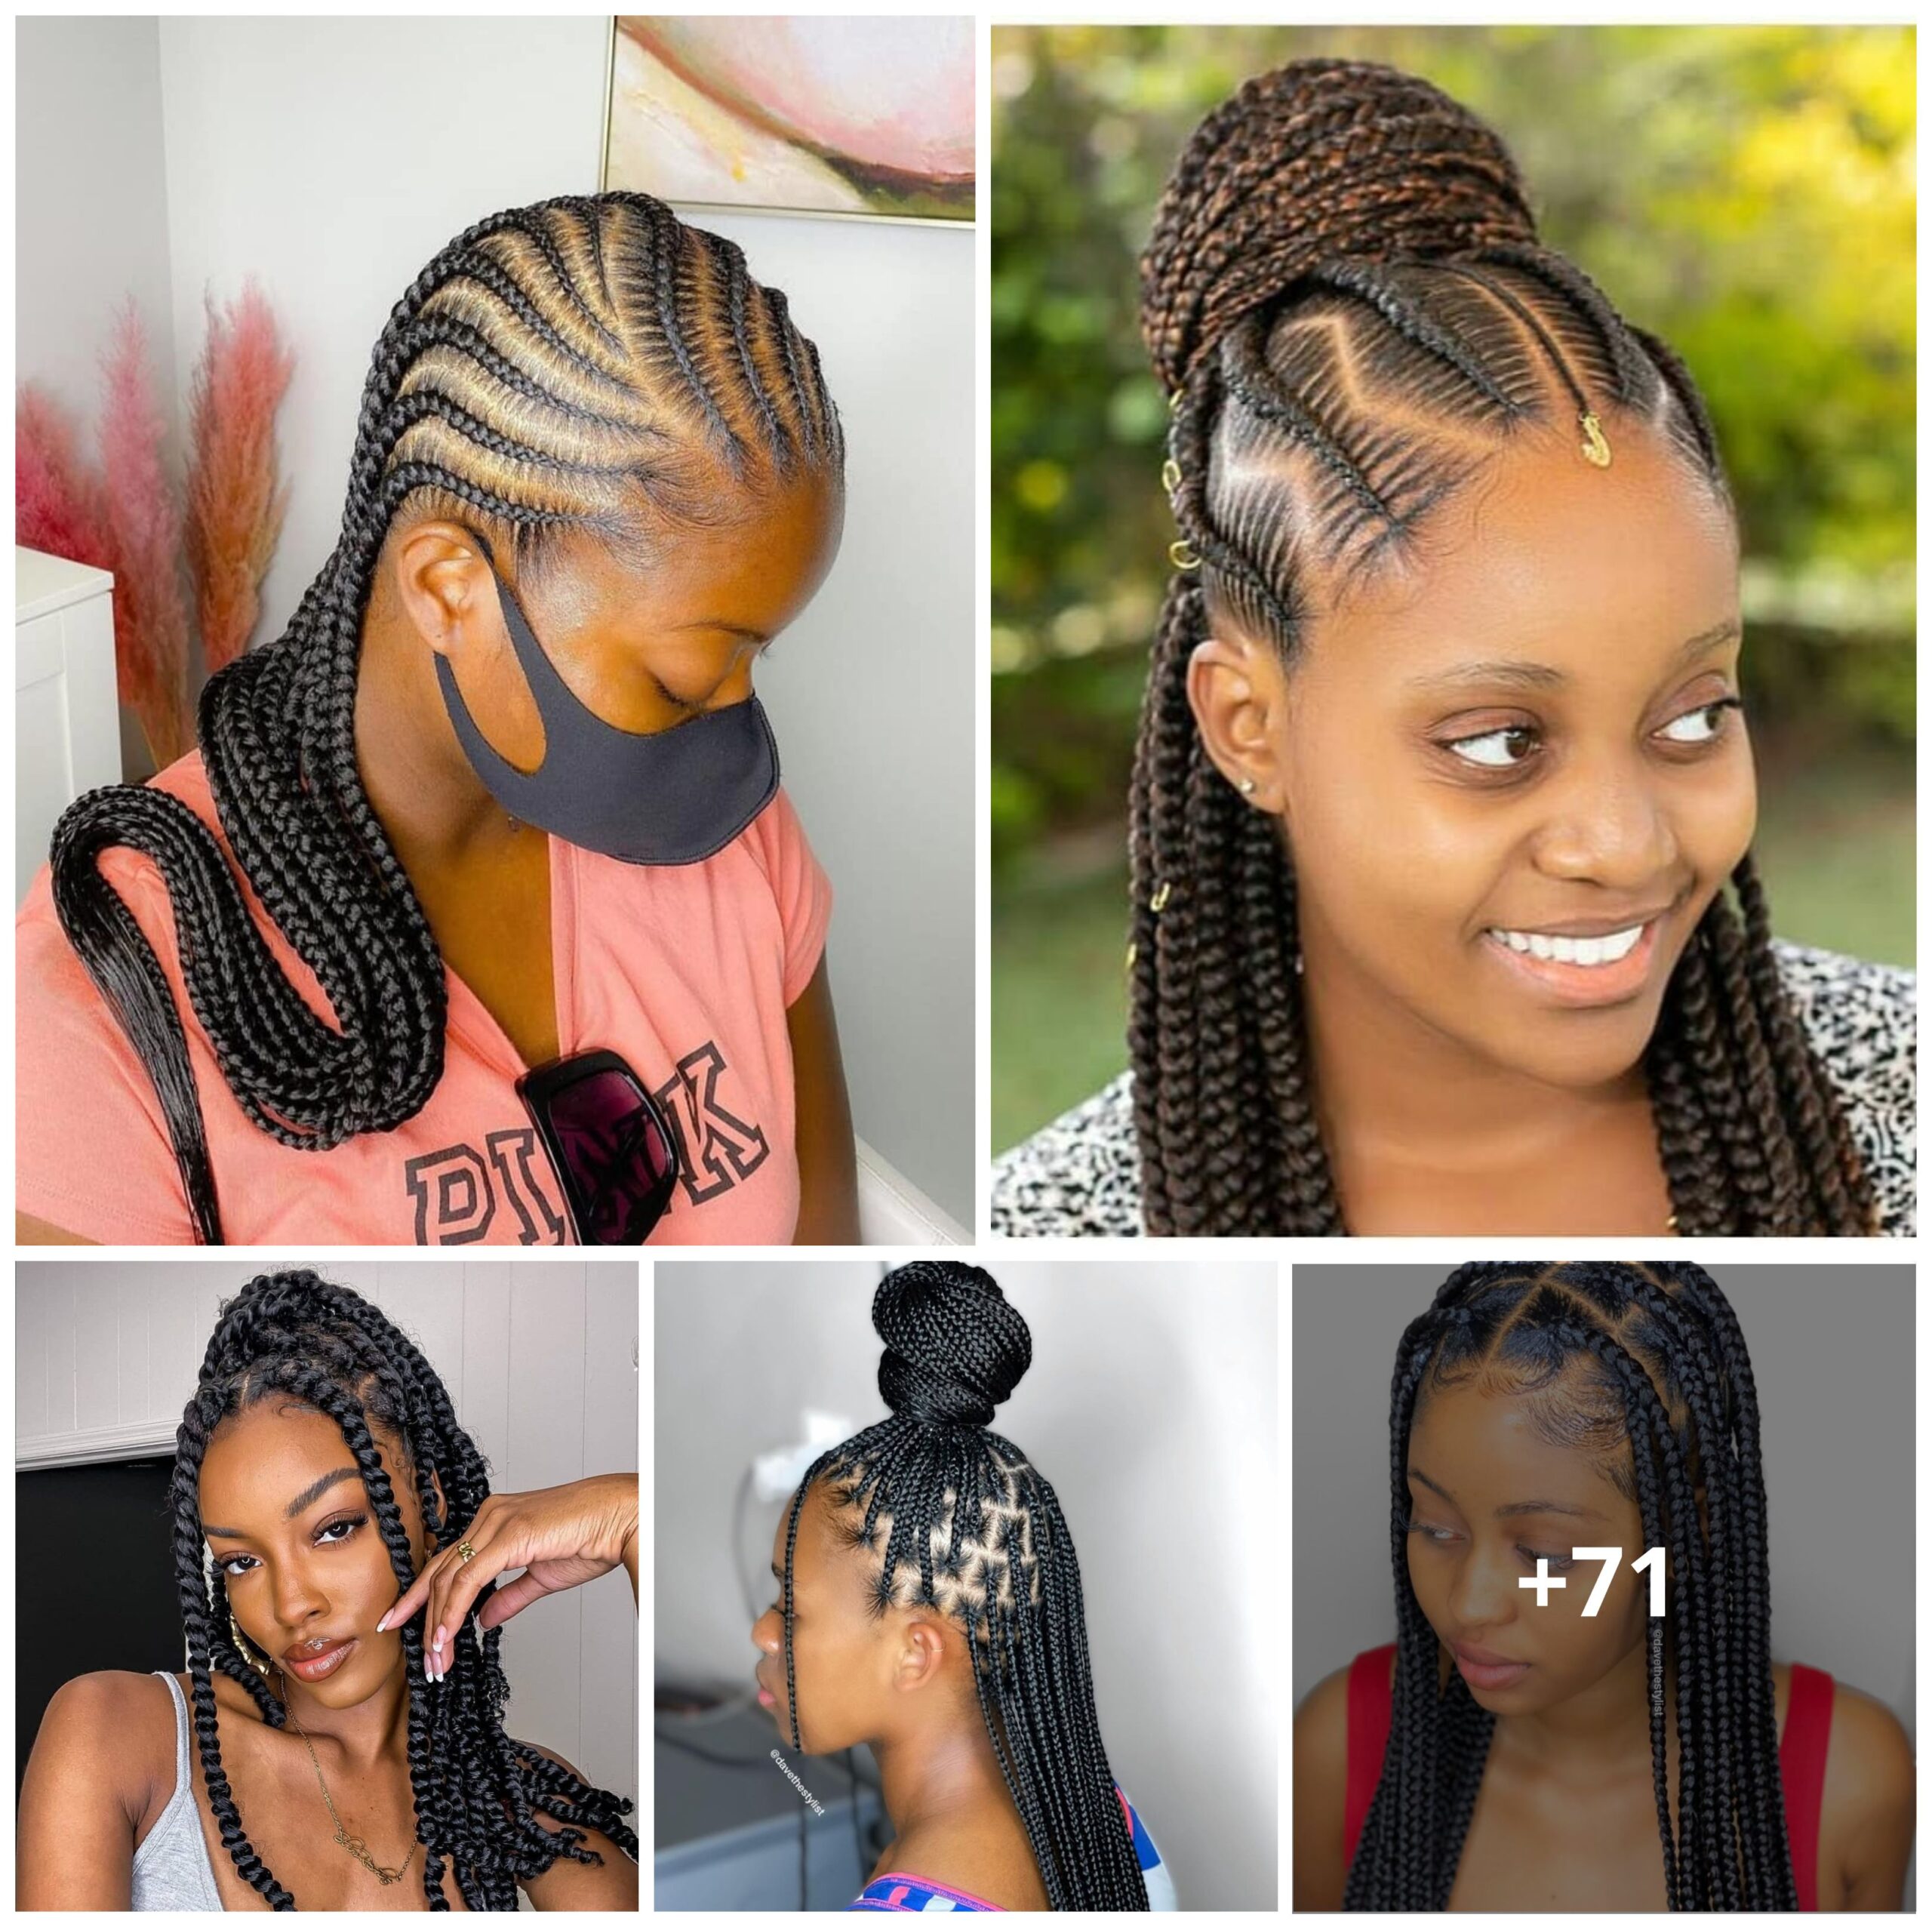 71 Hairstyles With Braids for Women to Try